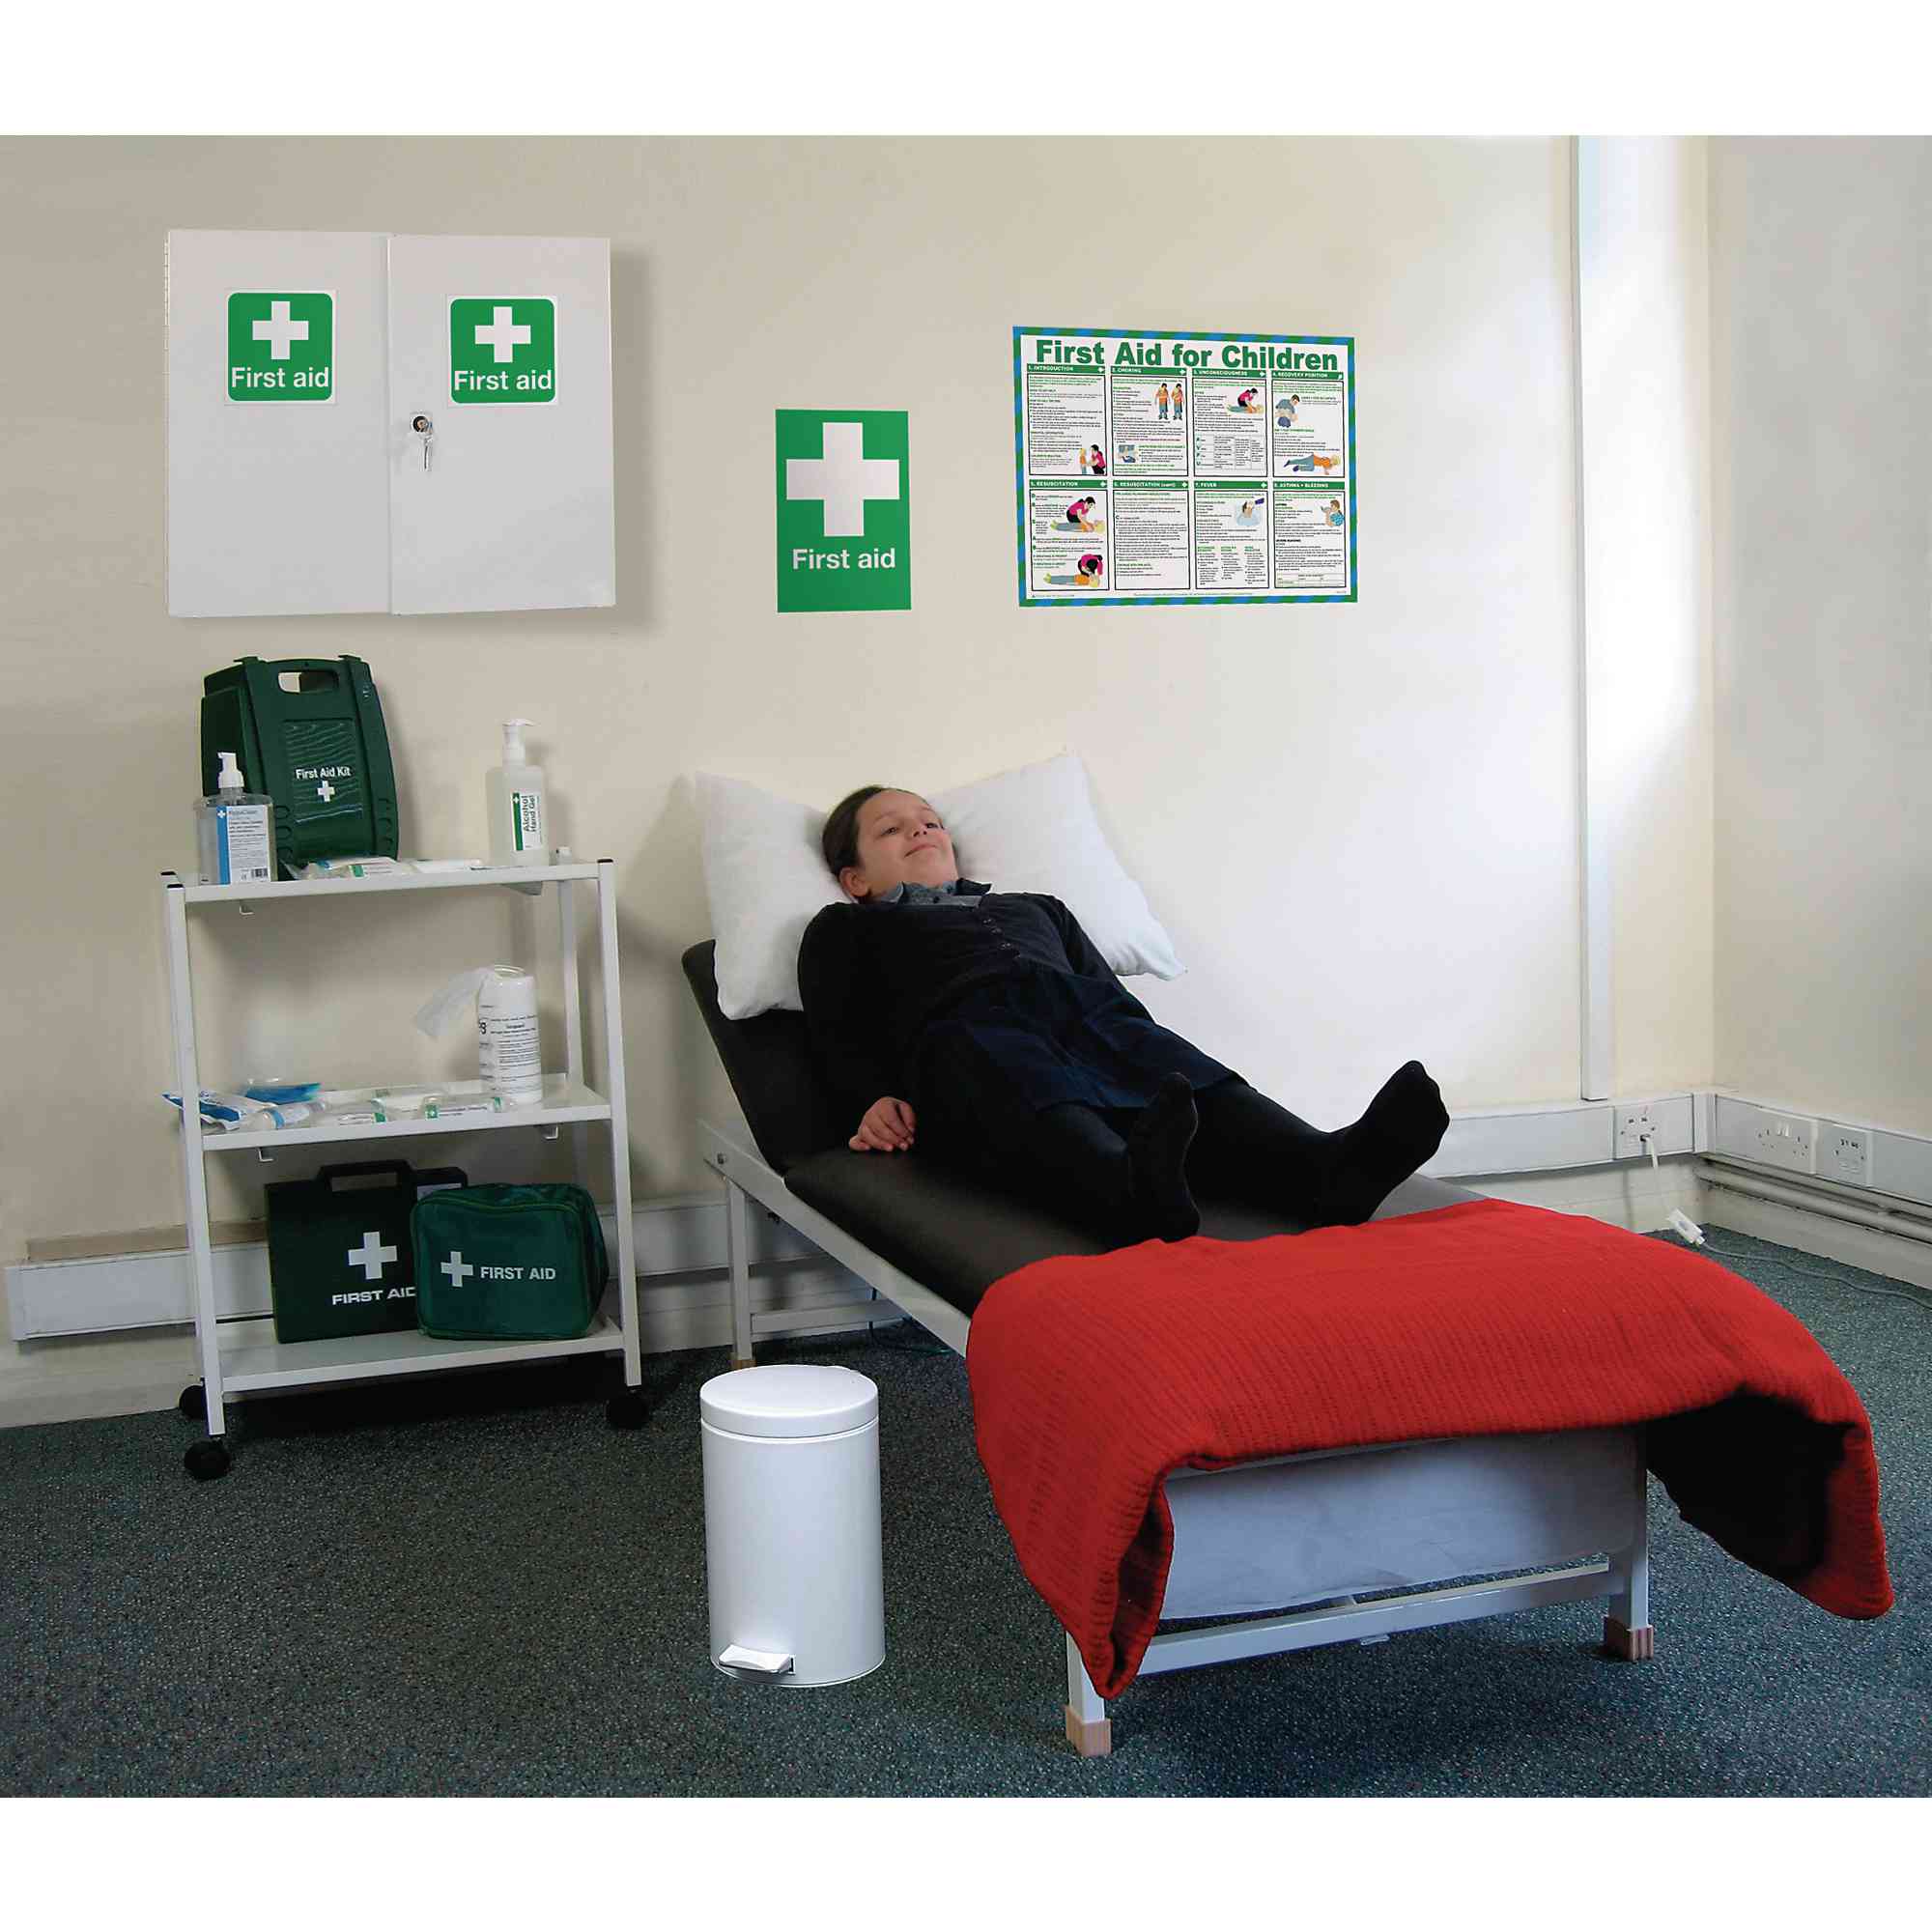 First Aid Room Furniture - The Y Guide